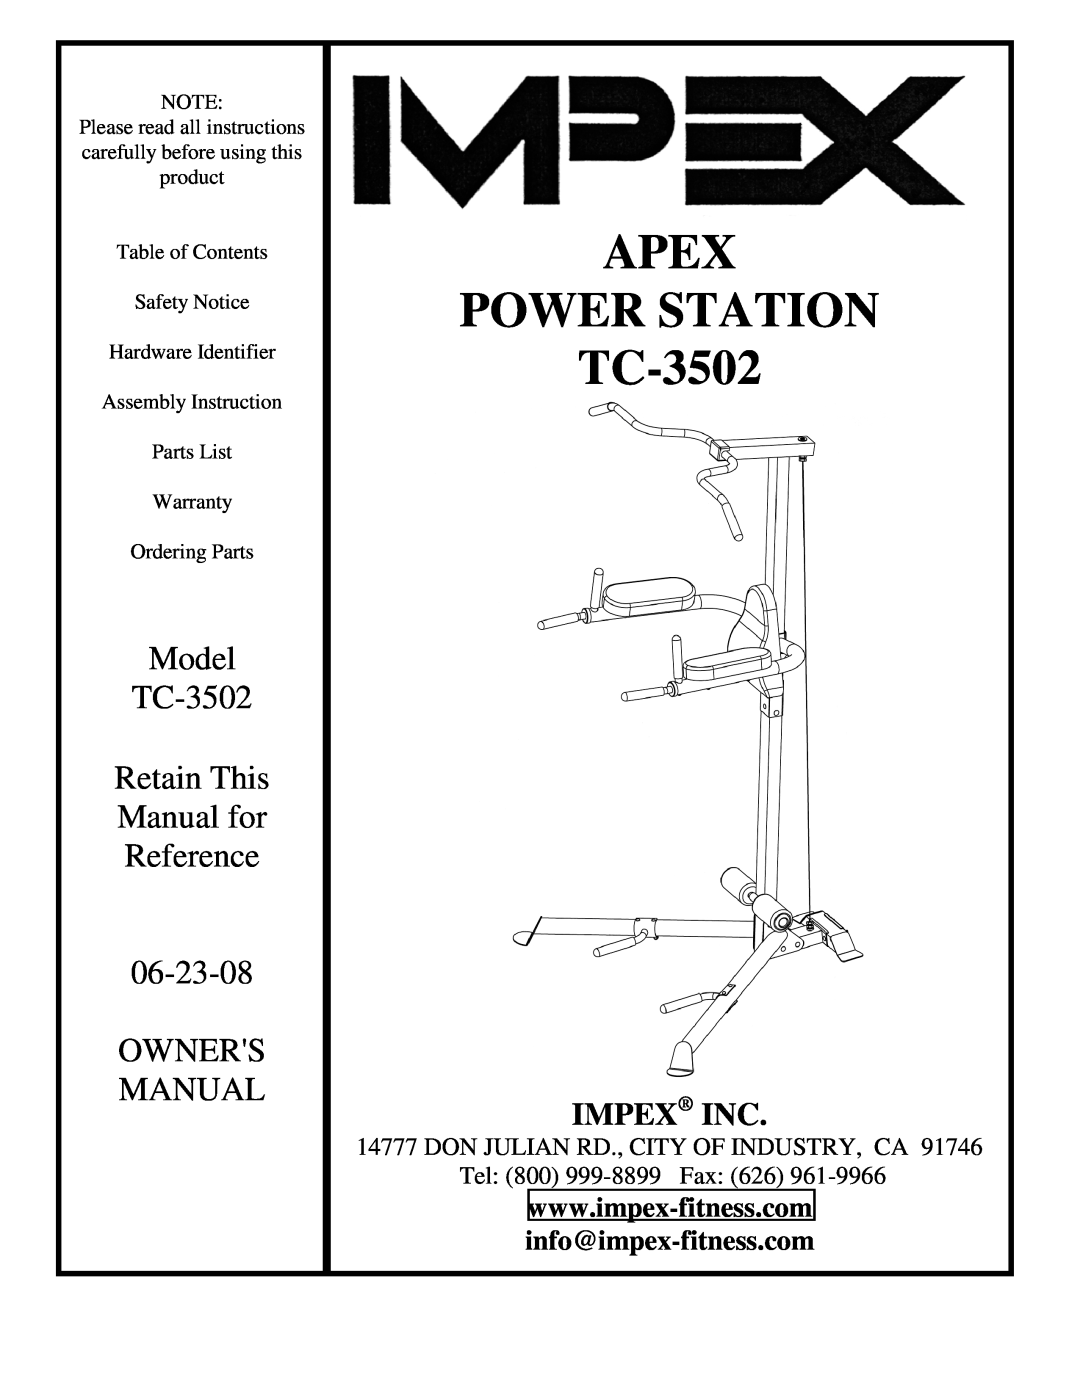 Impex manual APEX POWER STATION TC-3502, Impex Inc, DON JULIAN RD., CITY OF INDUSTRY, CA Tel 800 999-8899 Fax 626 